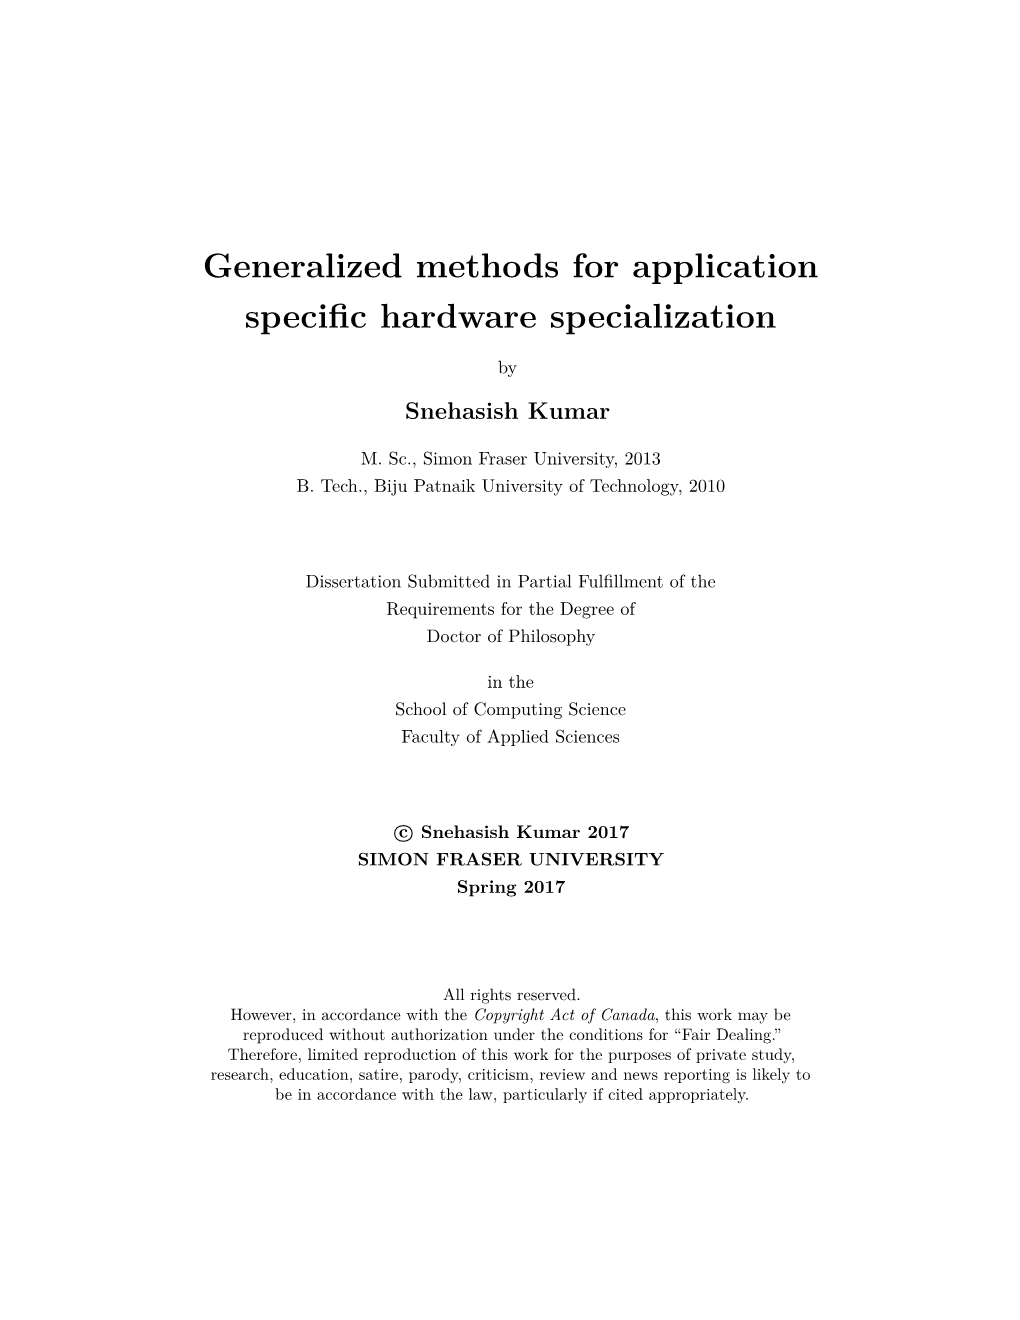 Generalized Methods for Application Specific Hardware Specialization